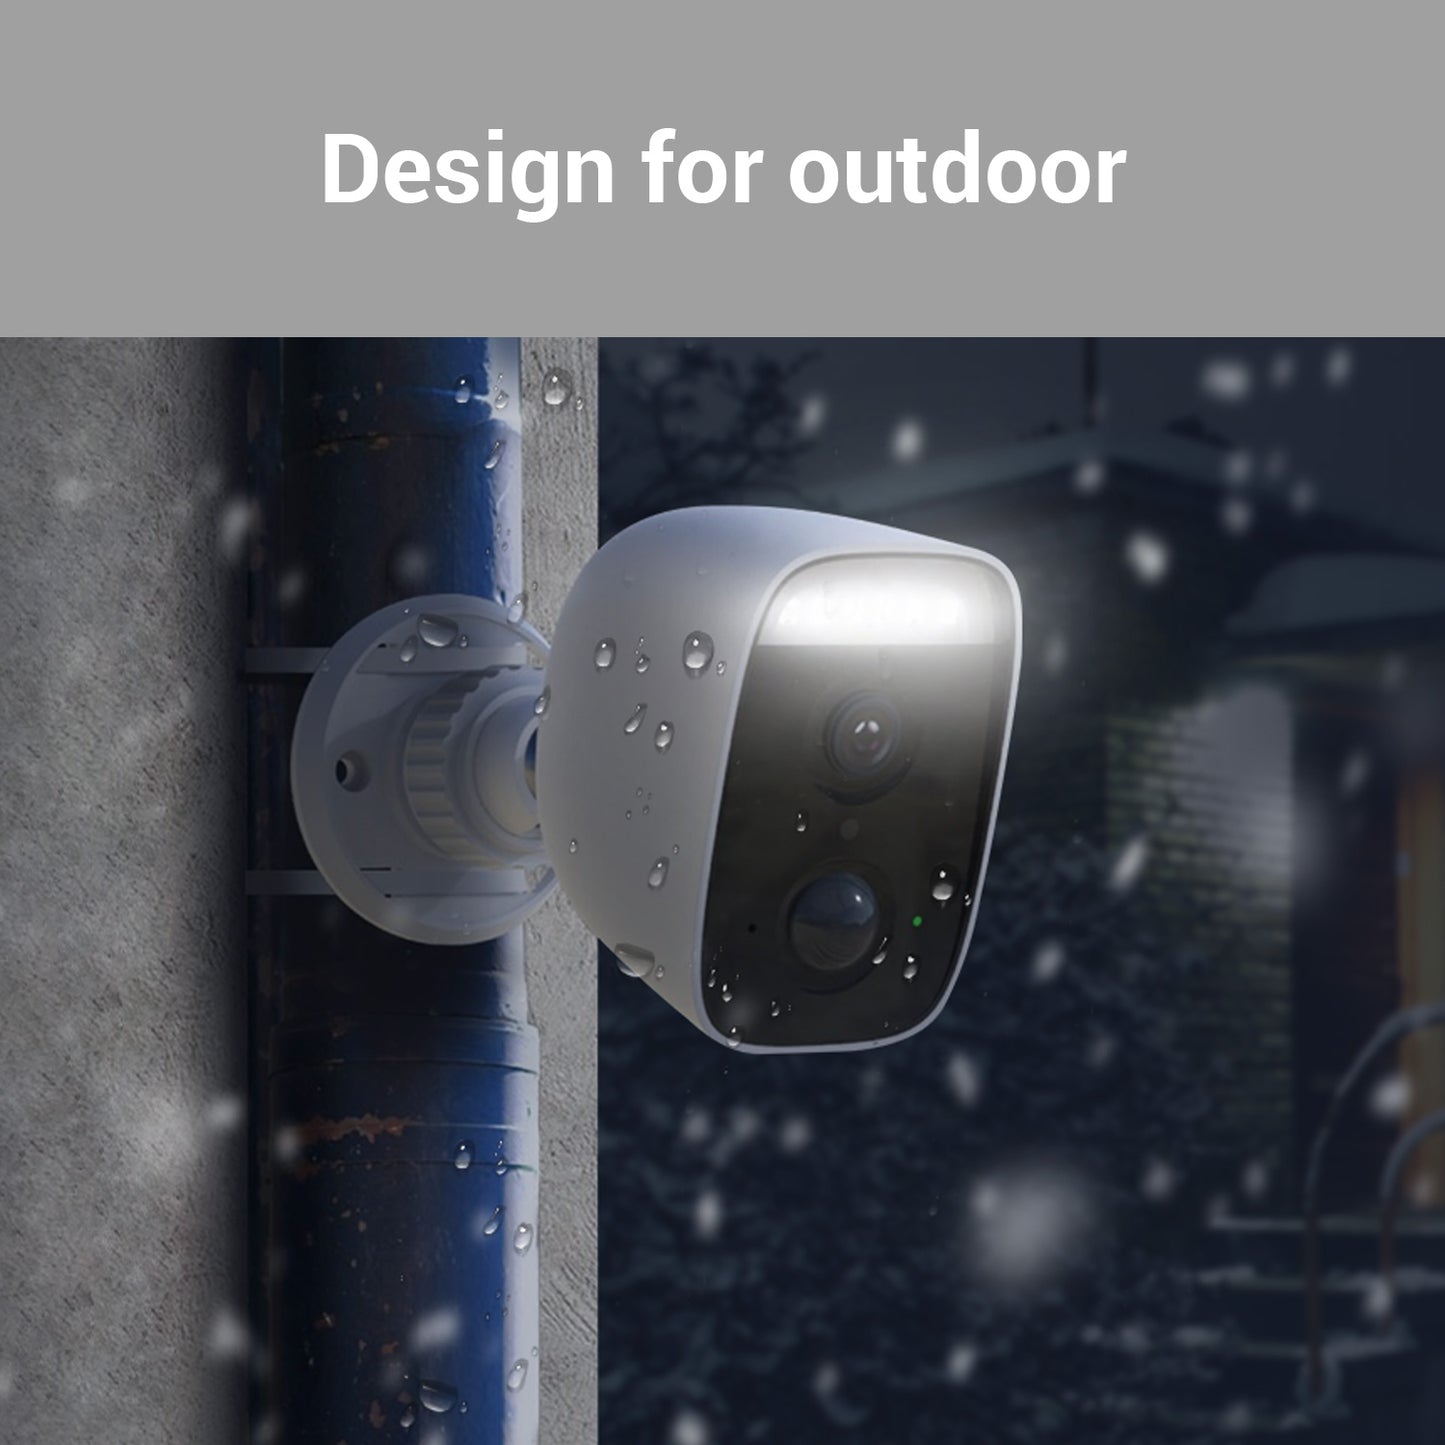 DCS-8630LH | mydlink Full HD Outdoor Wi-Fi Spotlight Camera with Built-in Smart Home Hub